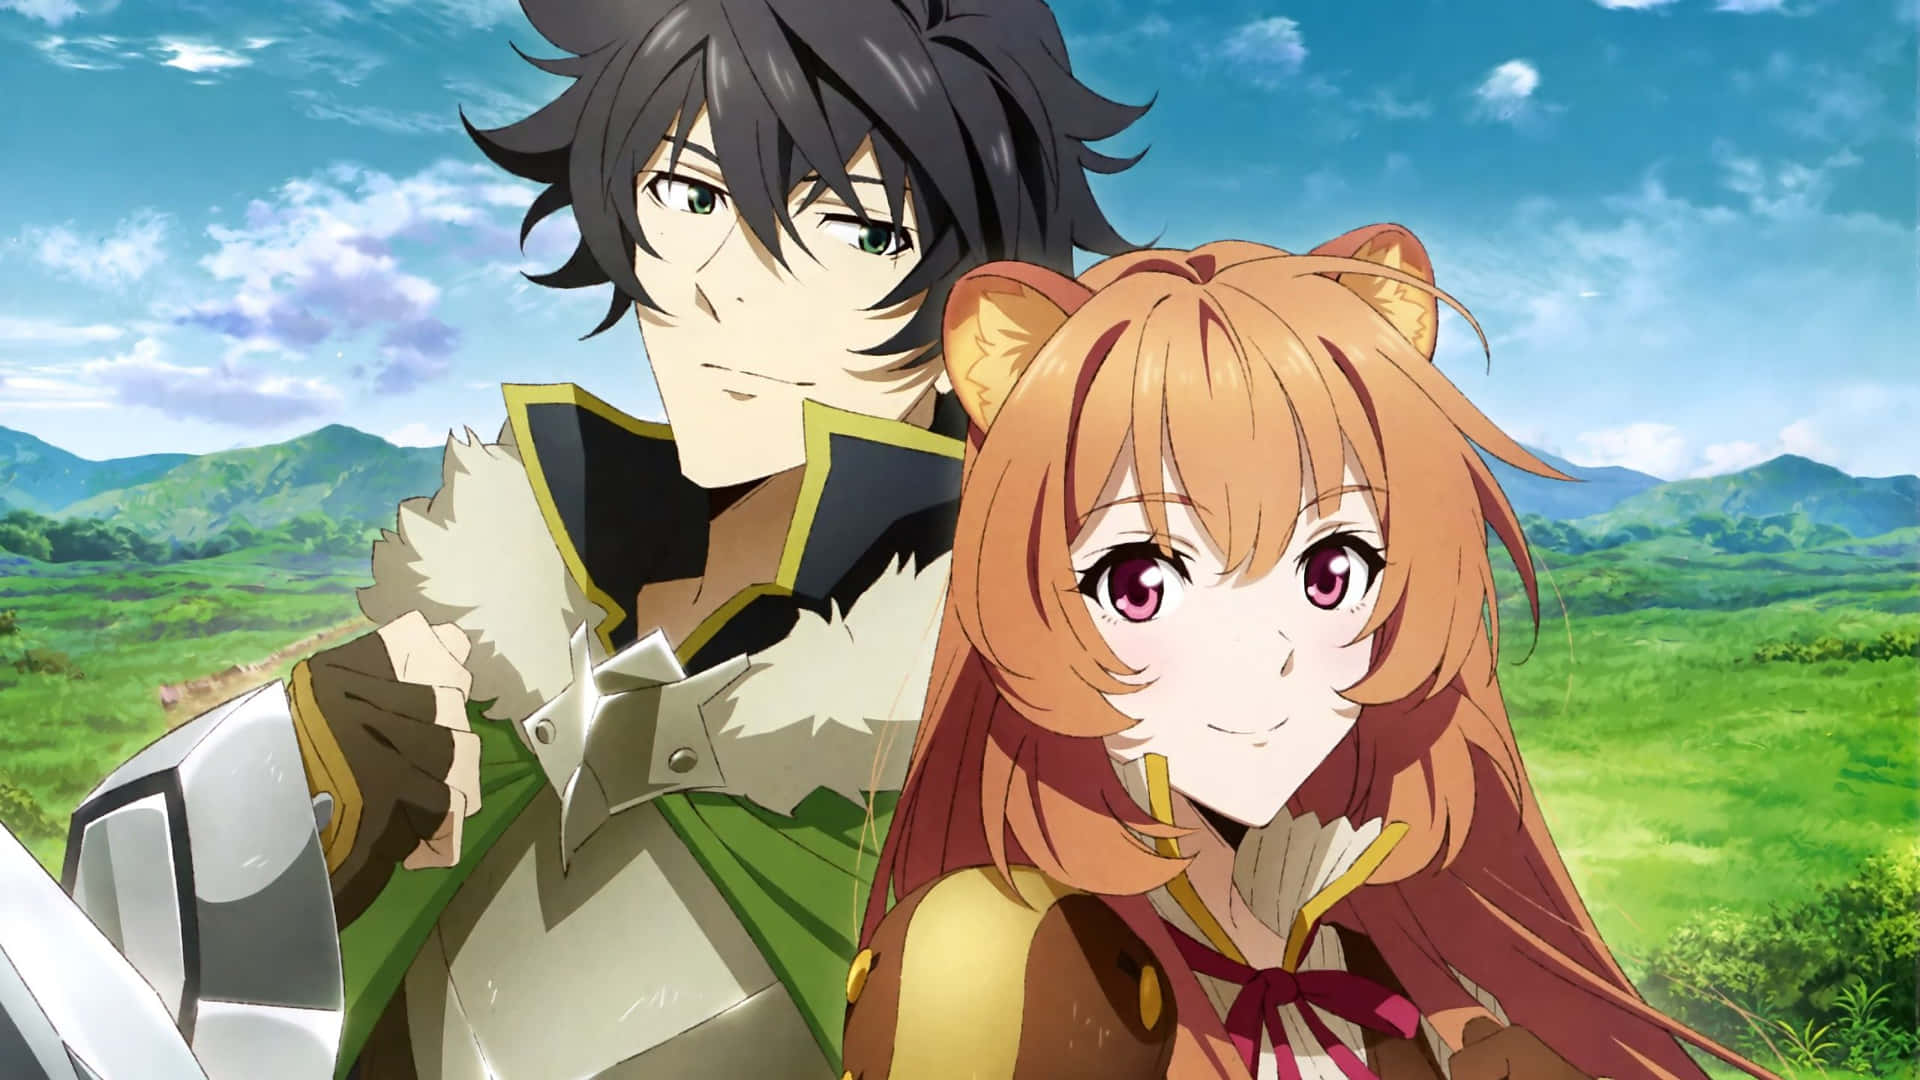 The Rising of the Shield Hero - Naofumi and his companions against a beautiful sunset